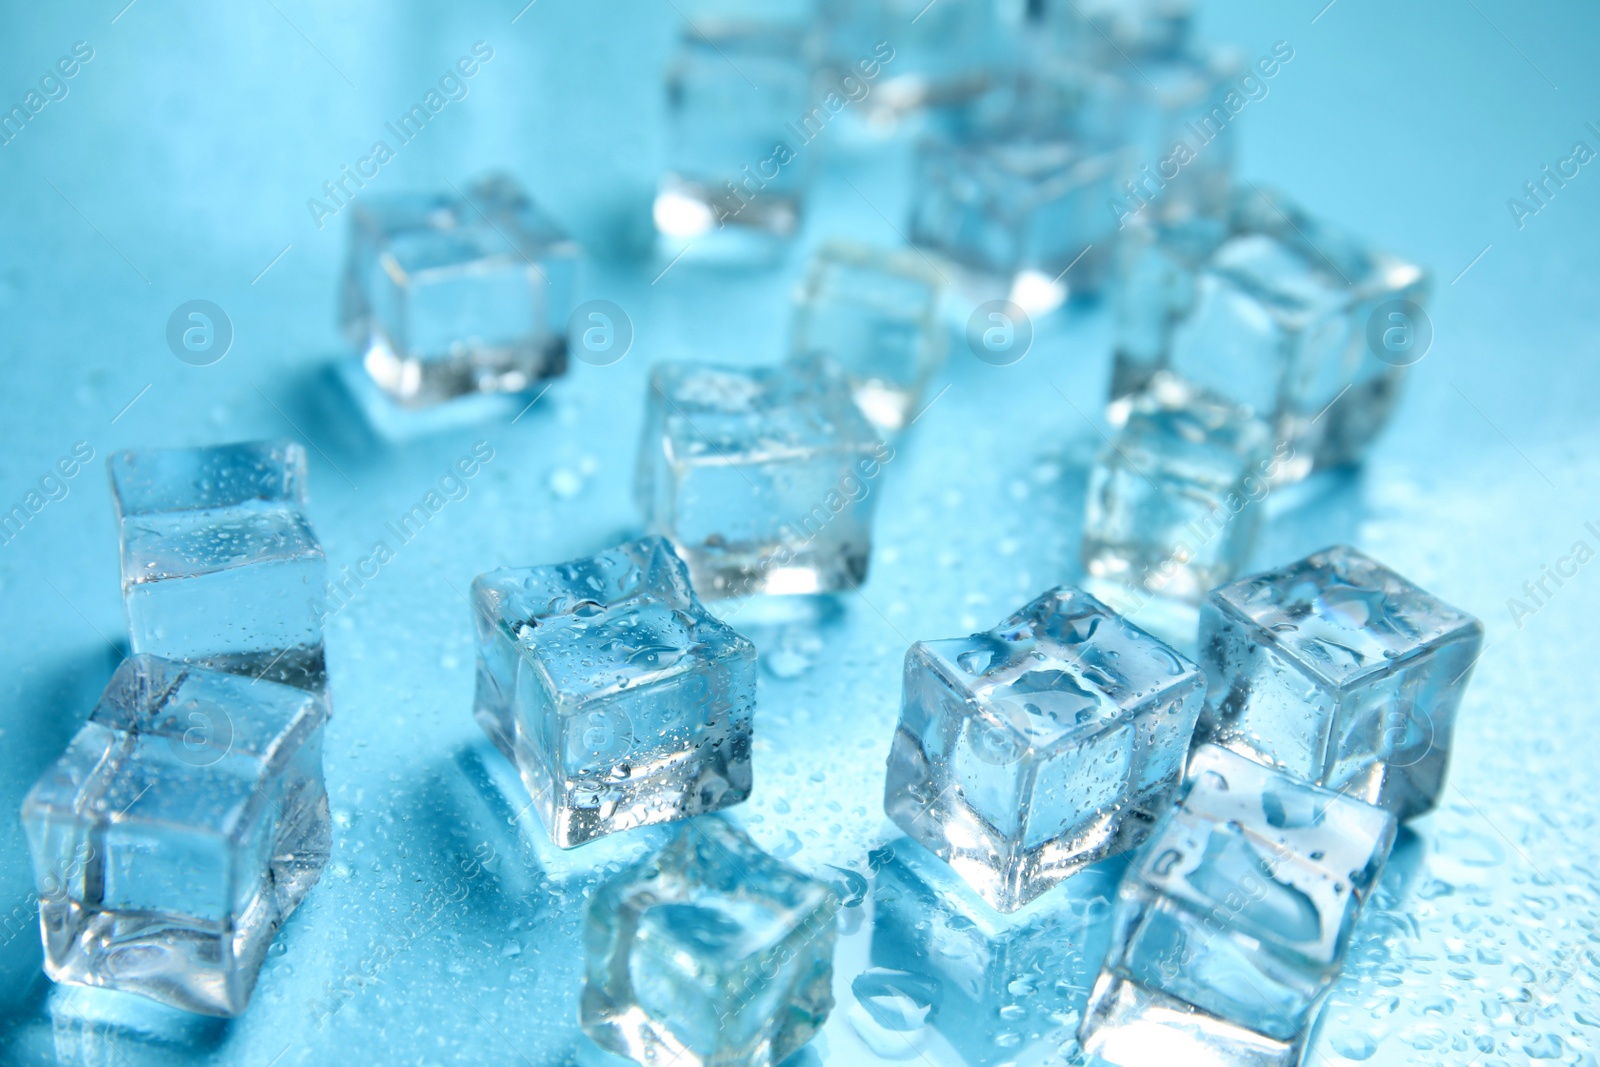 Photo of Ice cubes and water drops on turquoise background. Ingredient for refreshing drink